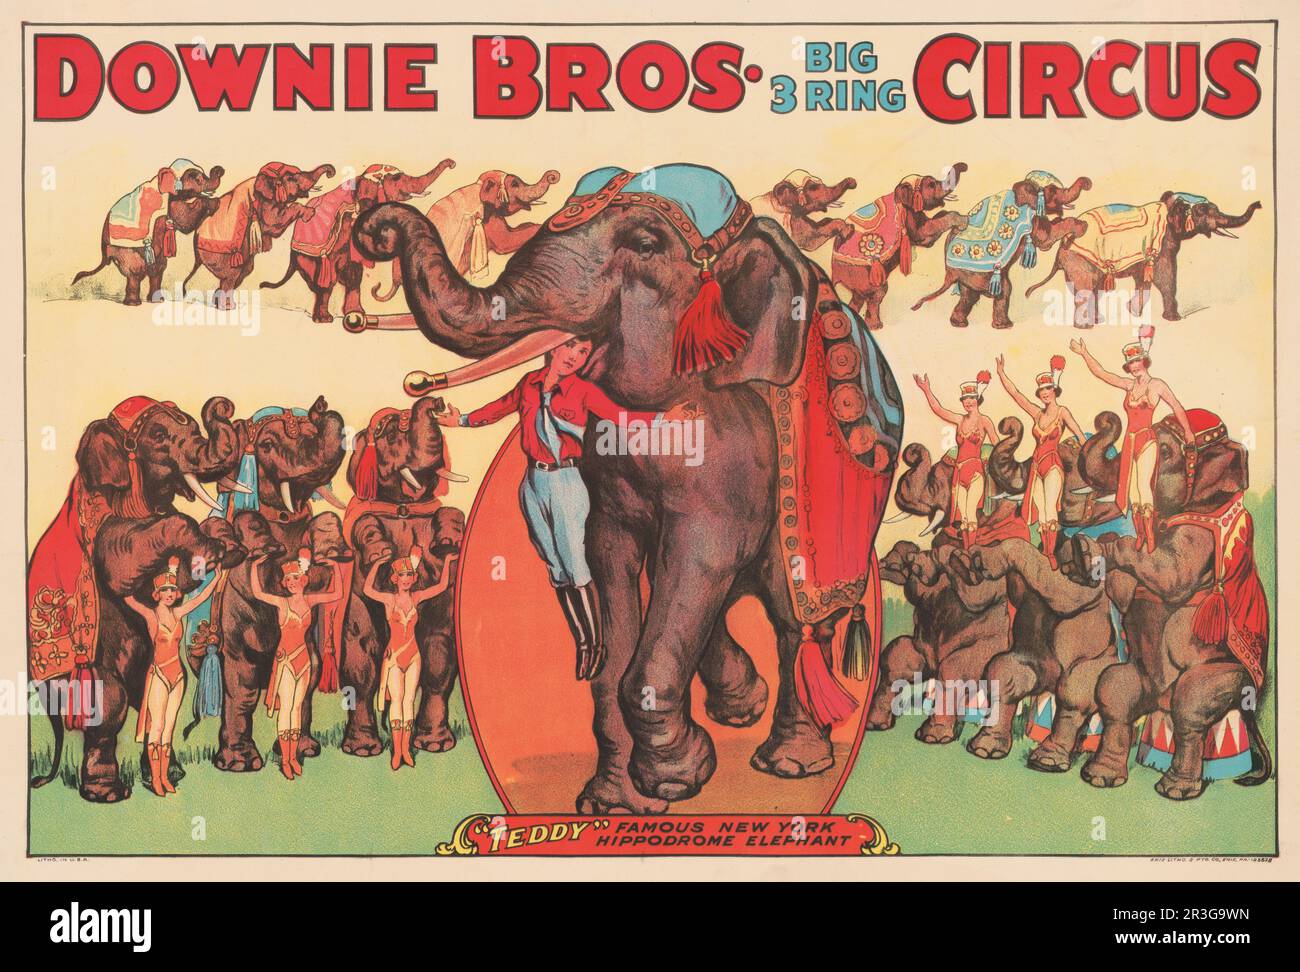 Vintage Downie Brothers circus poster showing performing elephants with women and trainer. Stock Photo